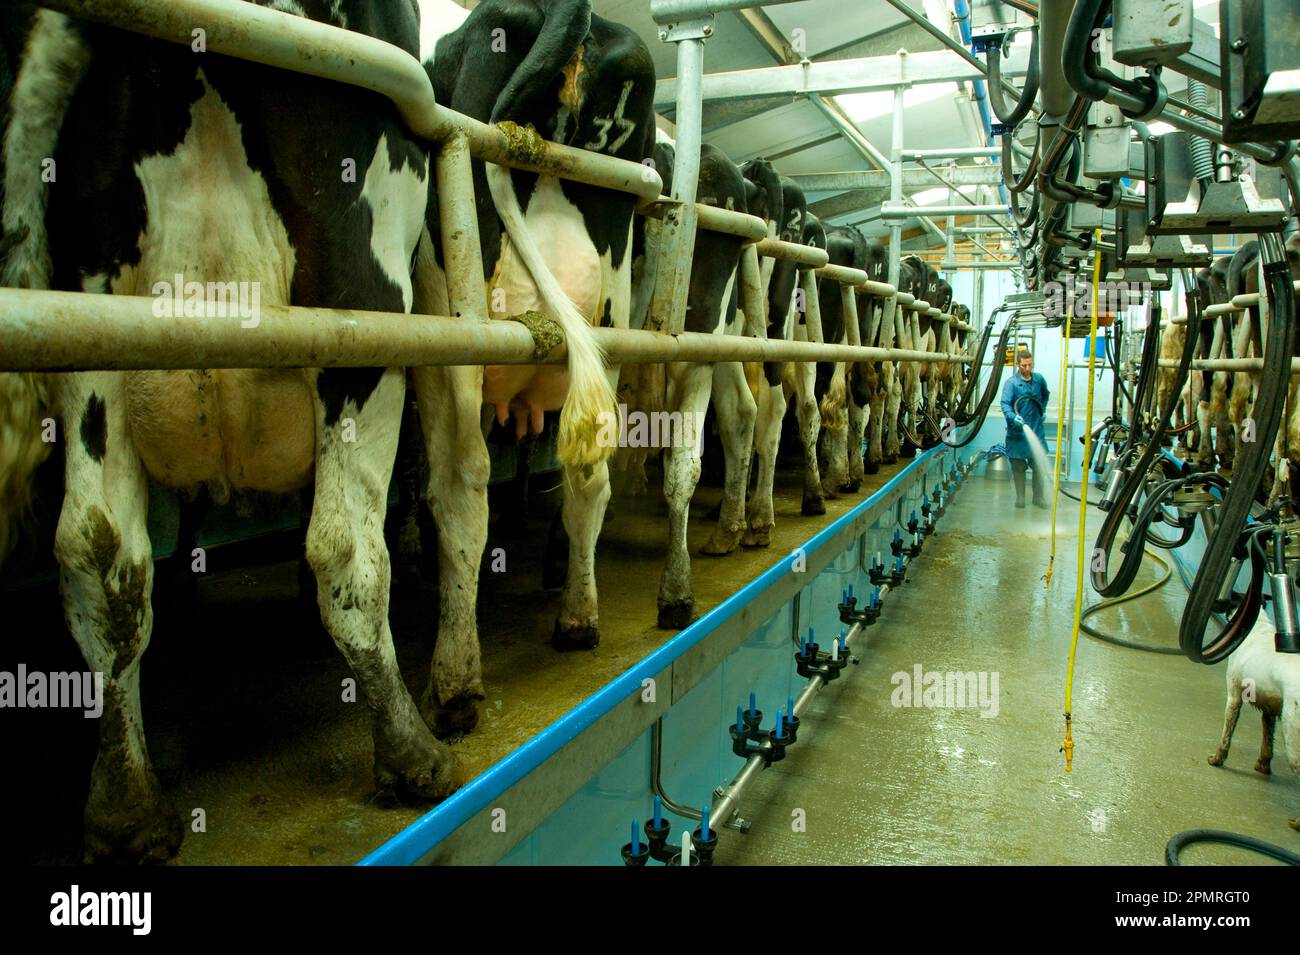 Domestic cattle, Holstein Friesian, cows in milking parlour, with dairy washing floor, England, Great Britain Stock Photo